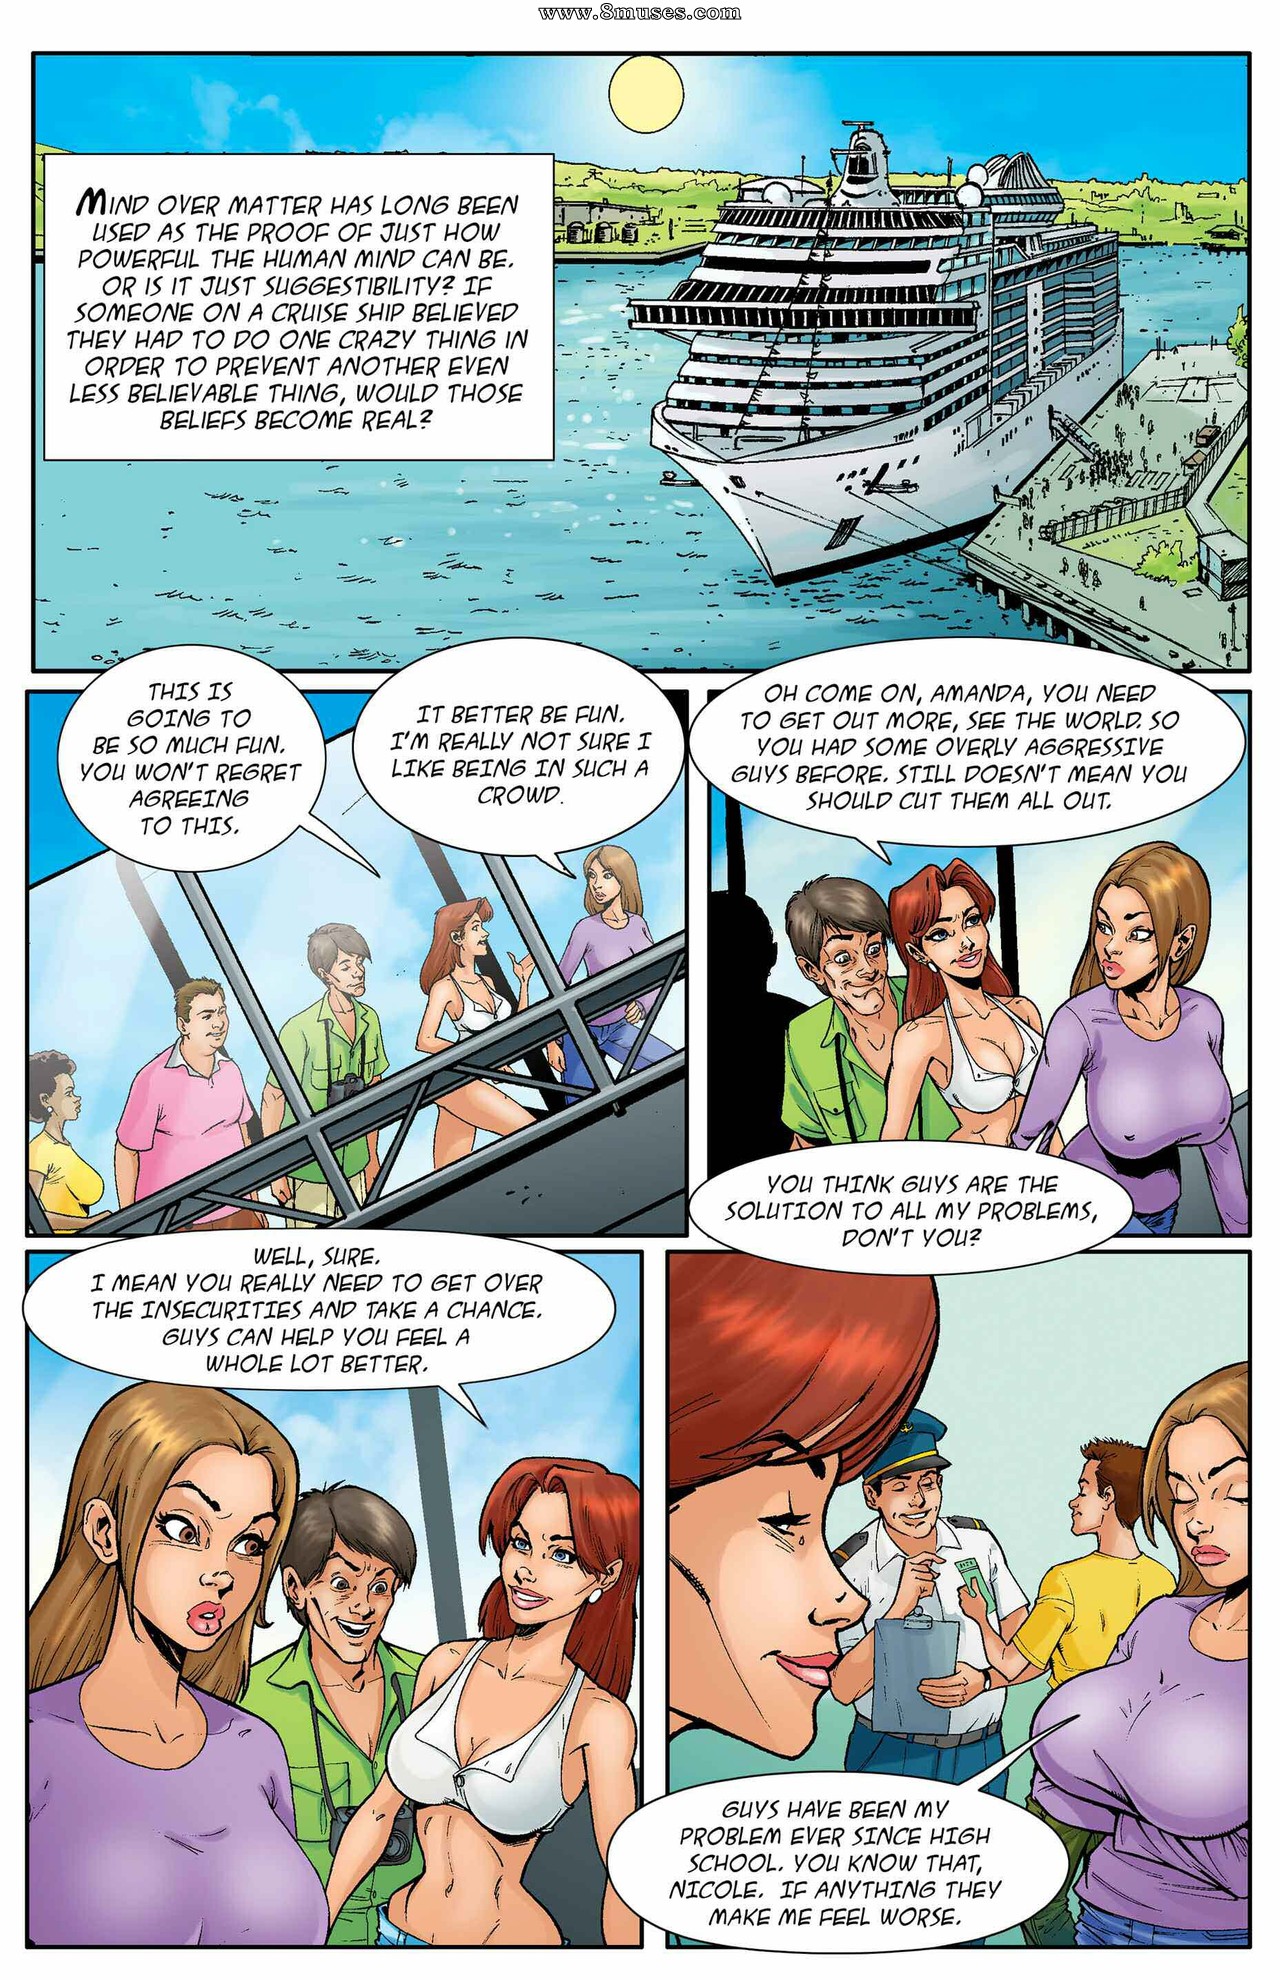 For Better Or Worse Porn - Cruise Controlled Issue 1 - 8muses Comics - Sex Comics and Porn Cartoons